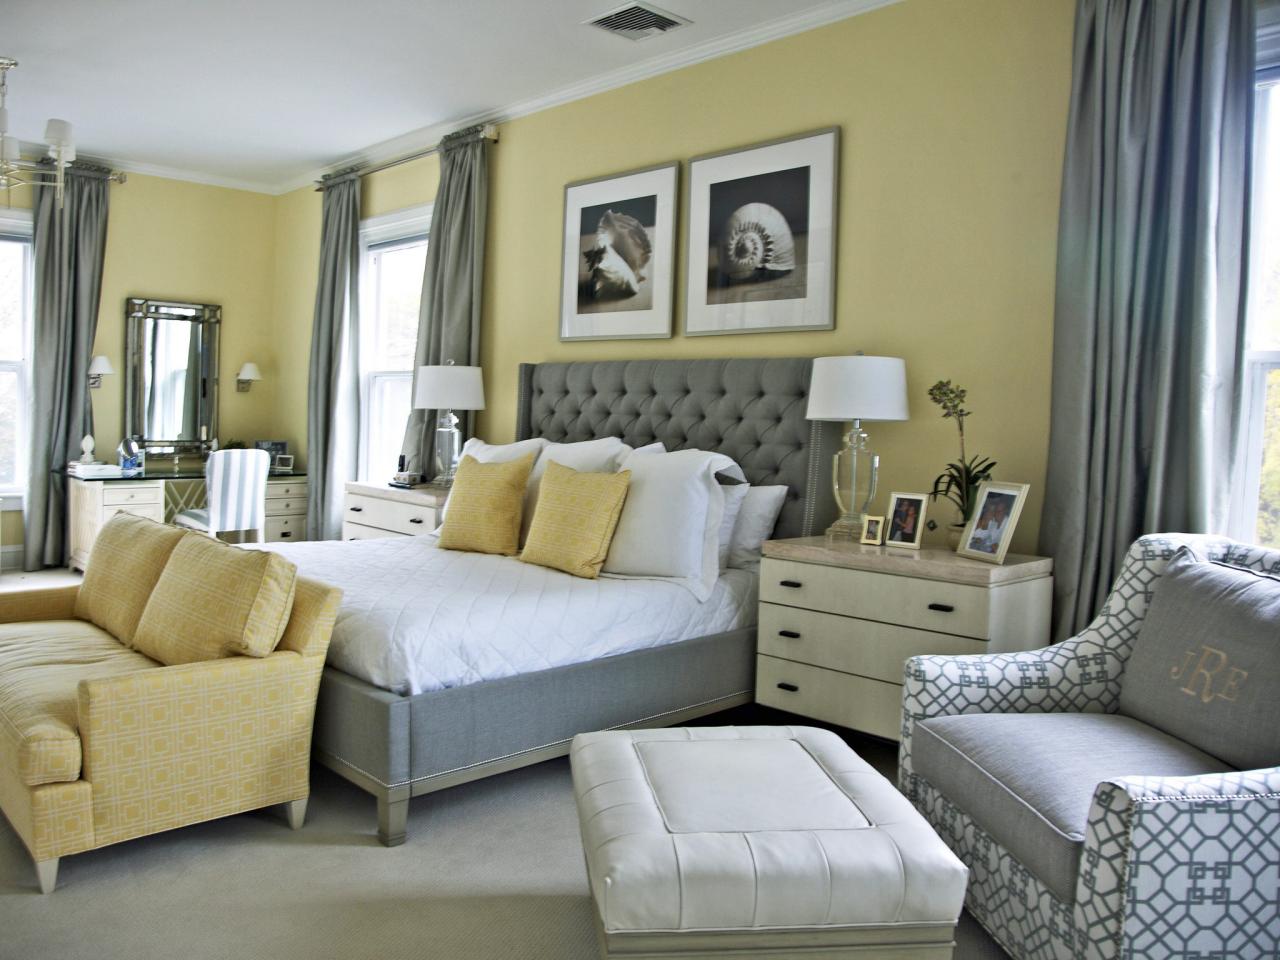 Great Colors To Paint A Bedroom Pictures Options Ideas HGTV